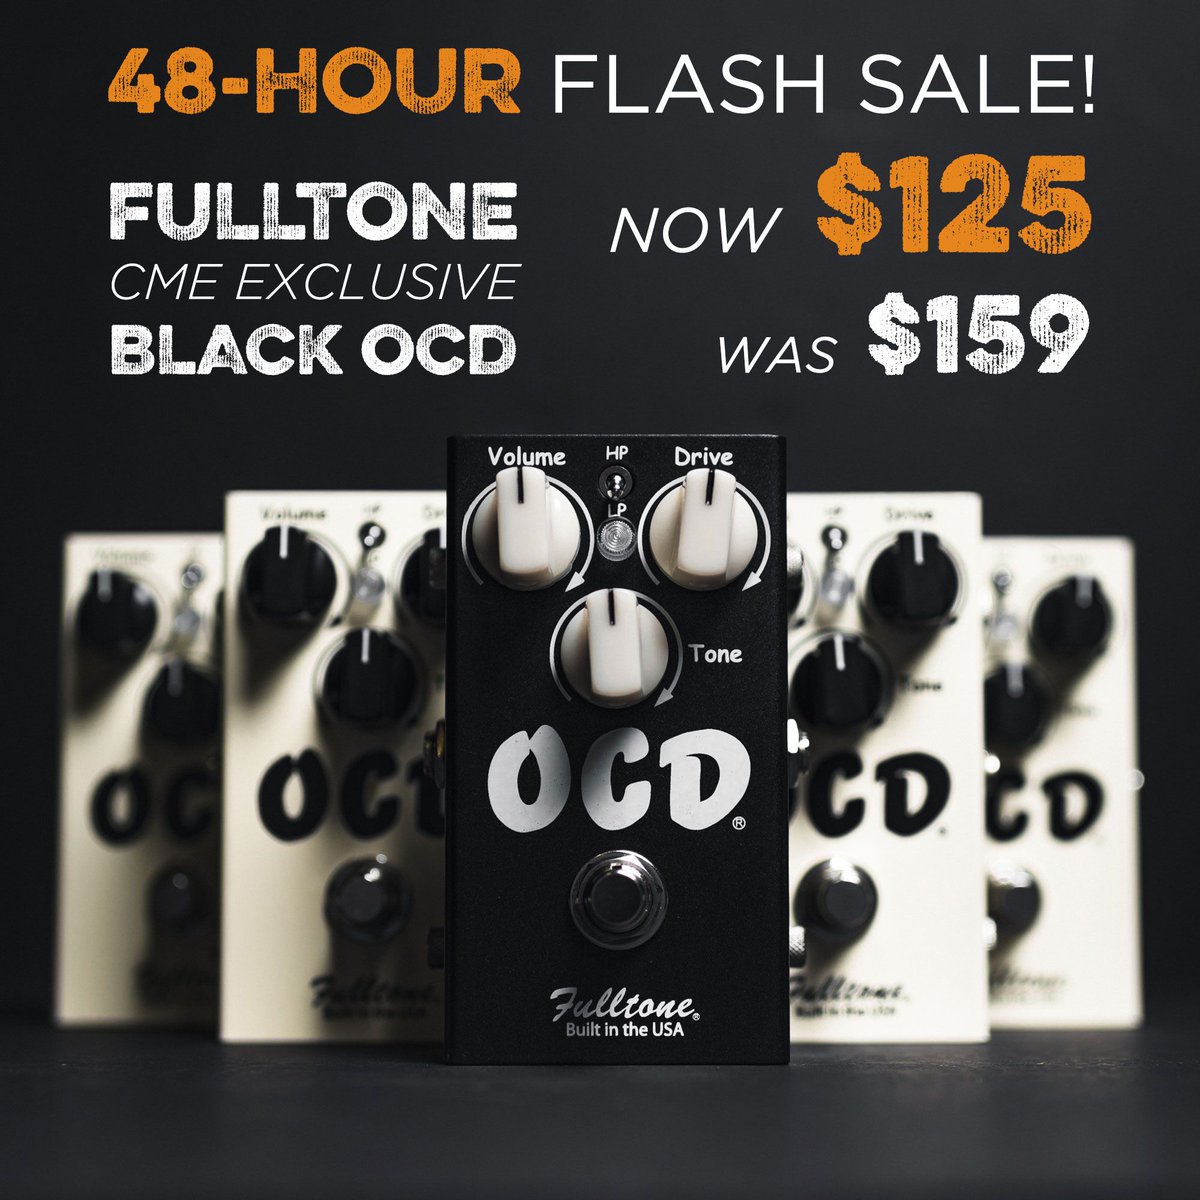 RT @ChicagoMusicEx: Great deal alert! You've got 48 hours to pick up the OCD in black for a sweet, sweet price at $125 LIVE on the site now! bit.ly/2IYrHHu
.
.
.
.
#cme #chicagomusicexchange #fulltone #ocd #cmeexclusive #greatdeal #sales #gearsale